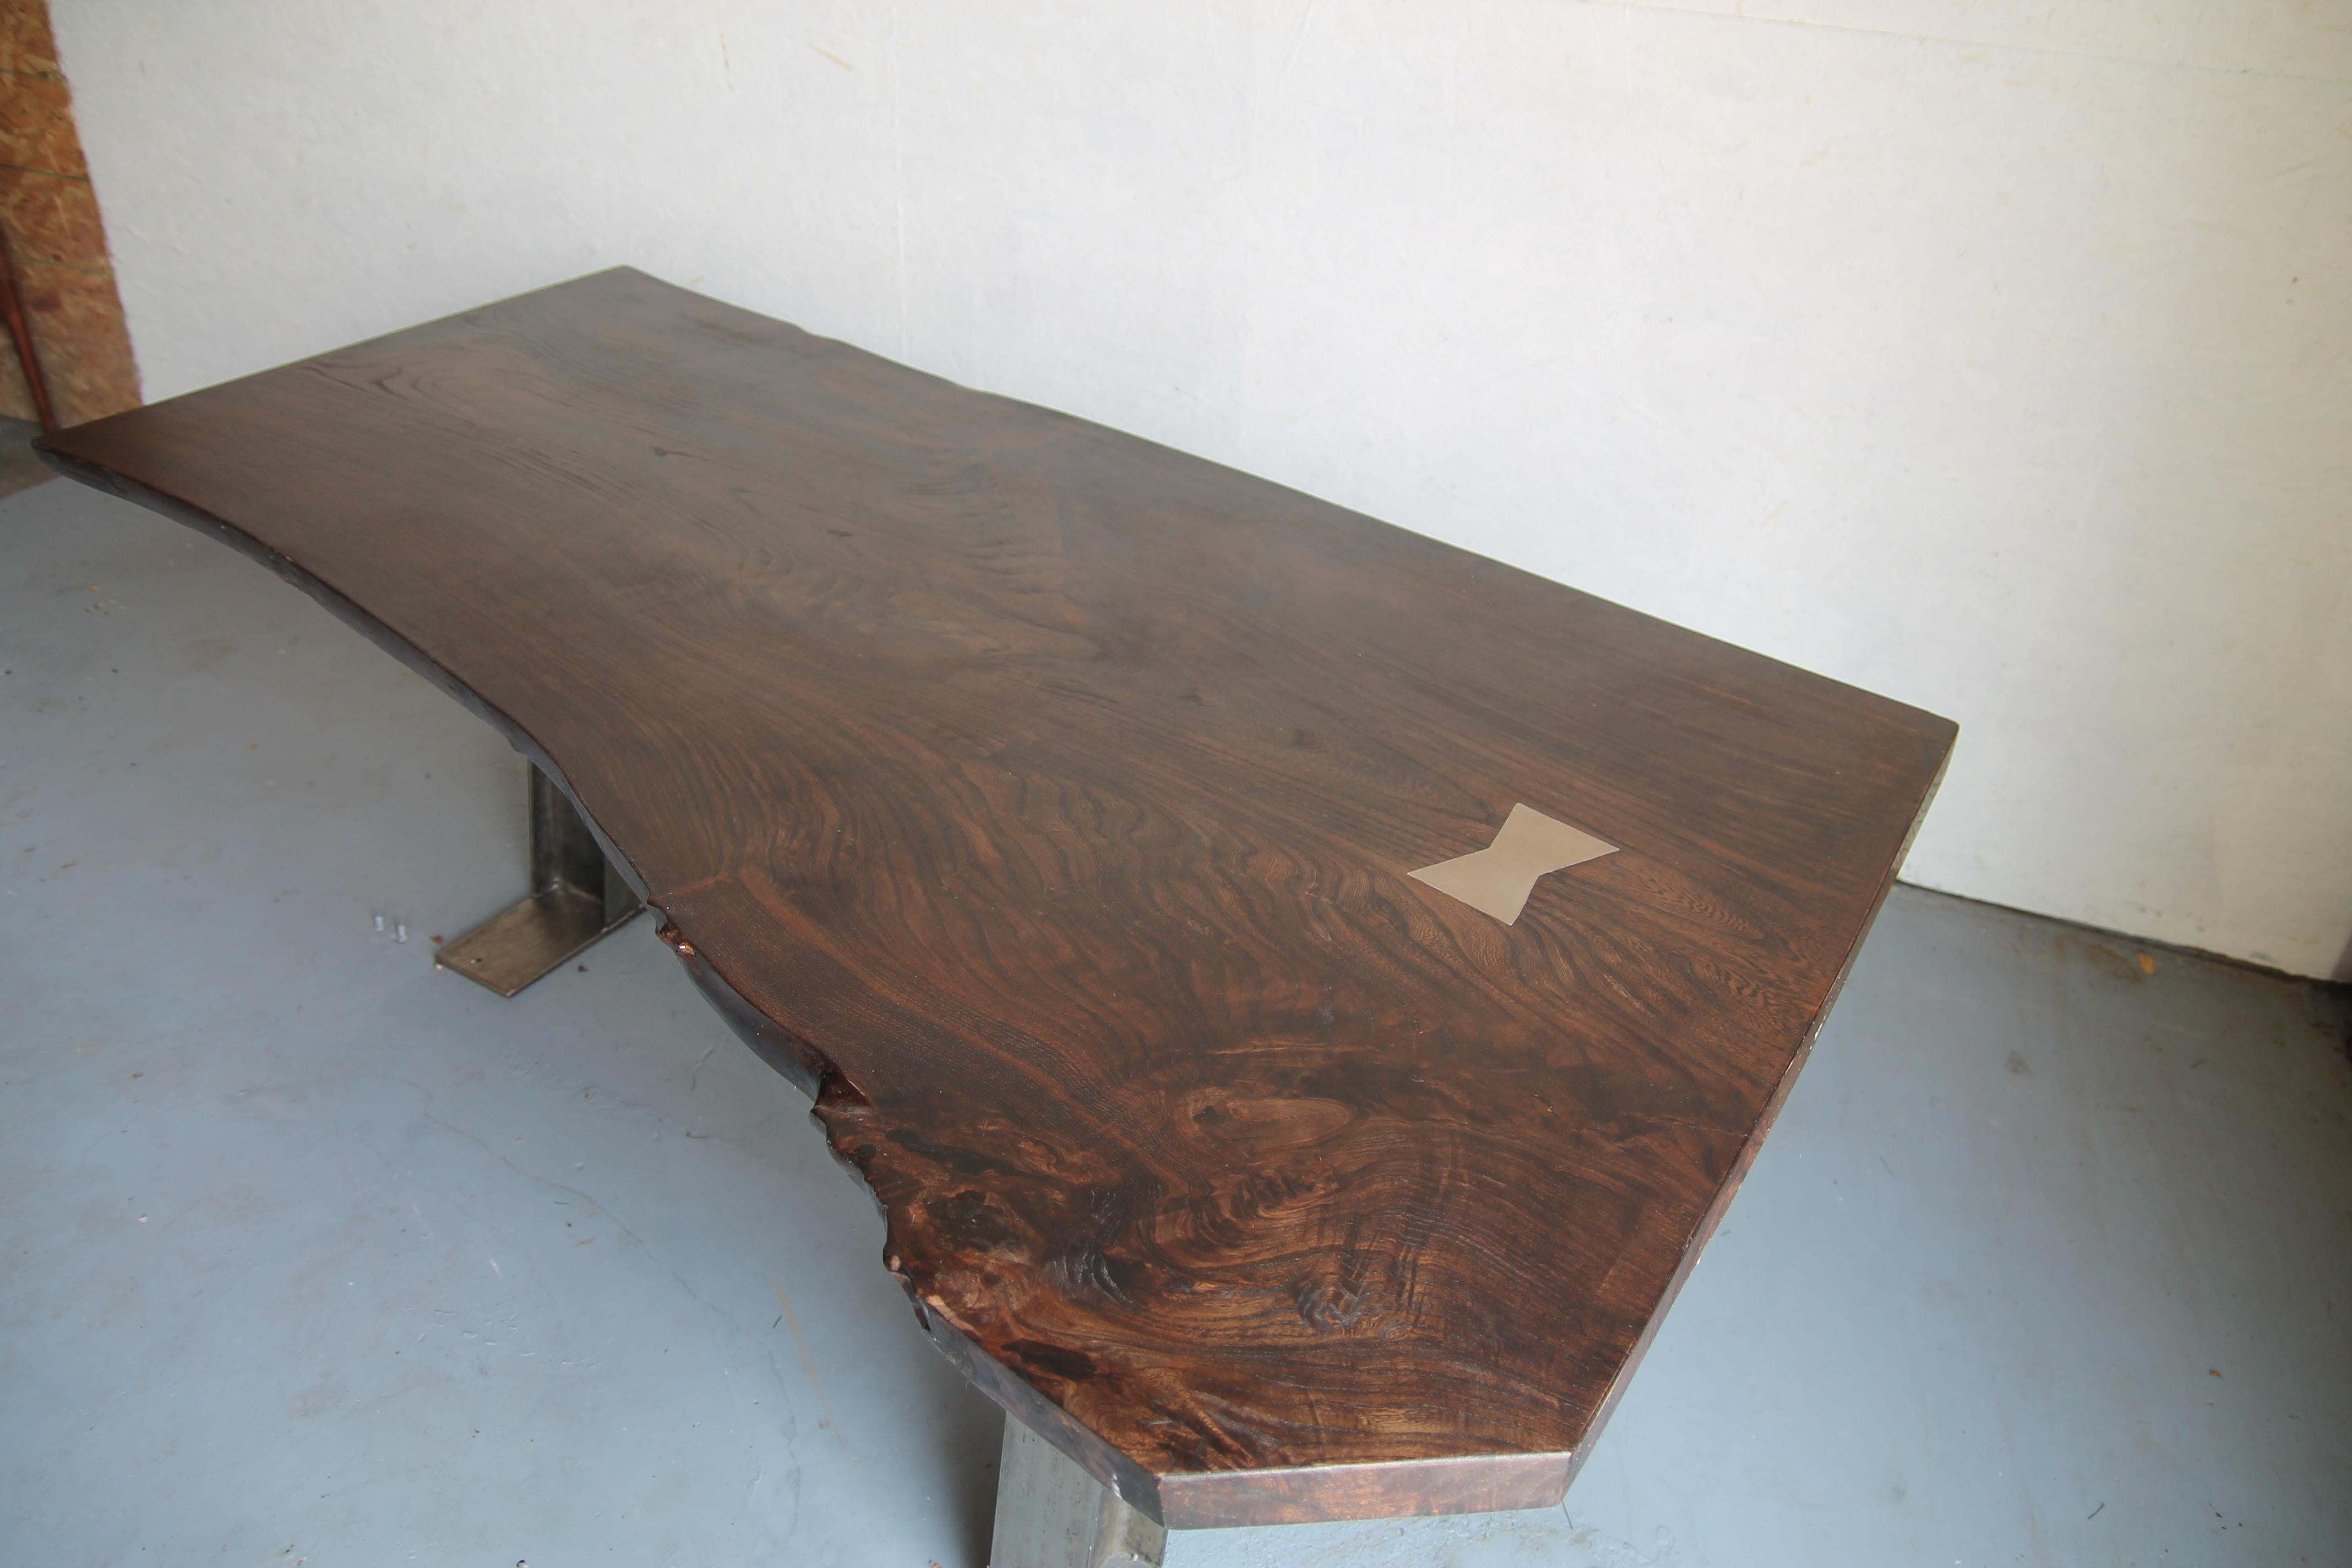 We are pleased to offer this wonderful 7 foot live edge table with custom 3-leg metal base. Wood is English elm stained with walnut stain and had a great large brass butterfly on top. Would make a great small dining table or desk.